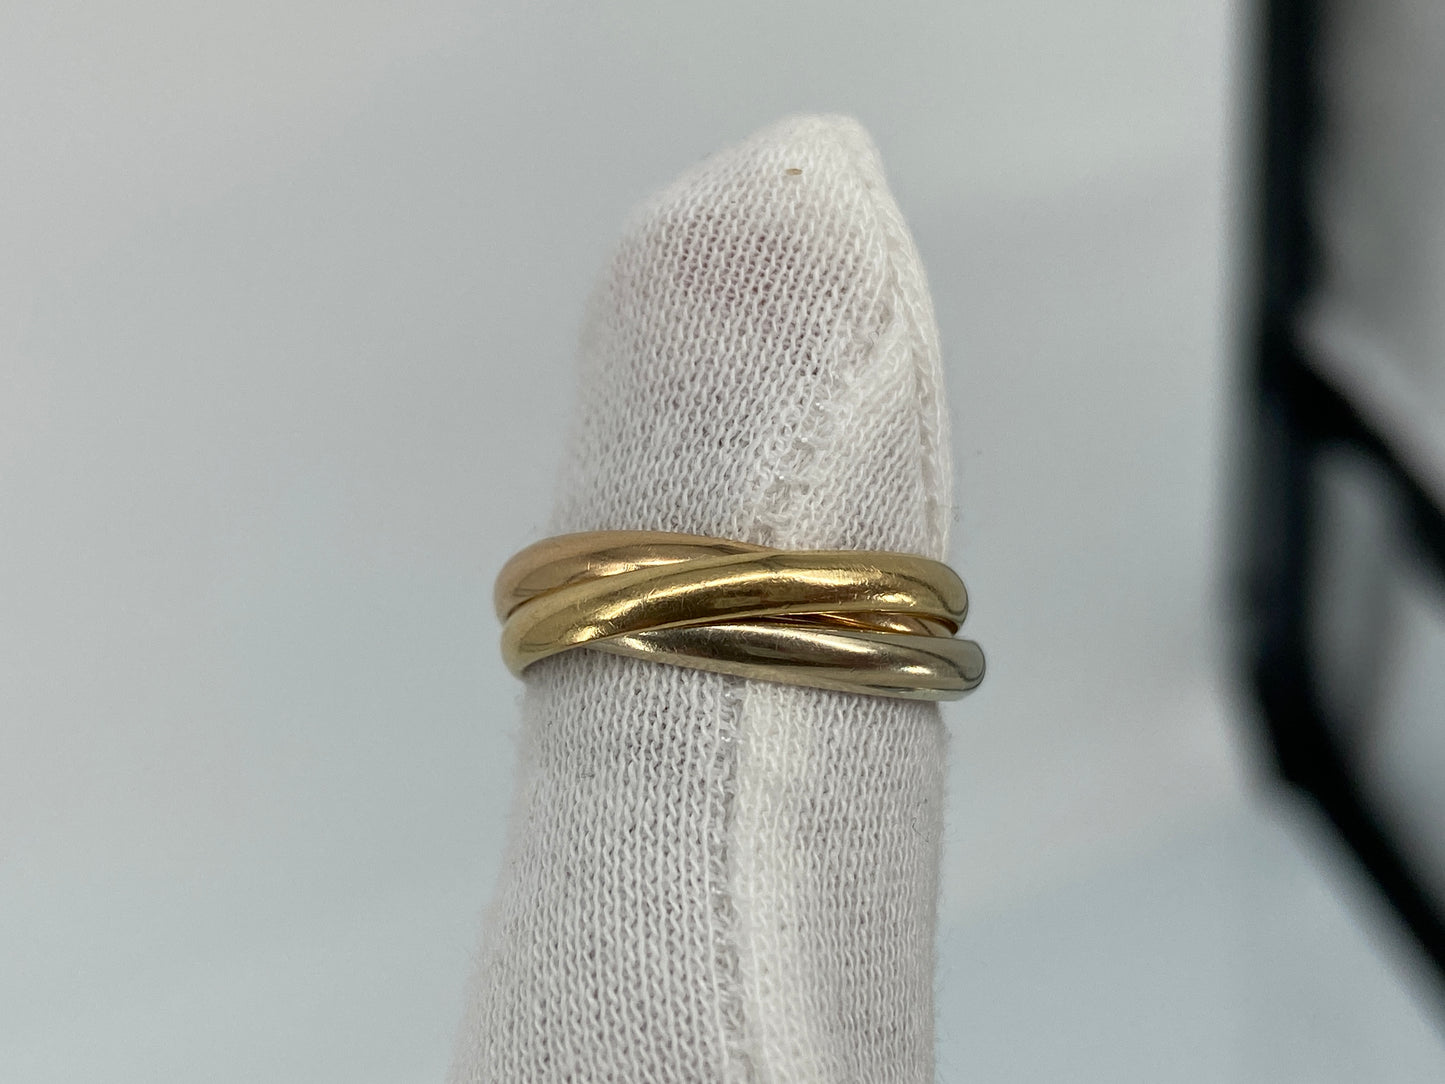 Cartier Trinity Ring Gold Size 52